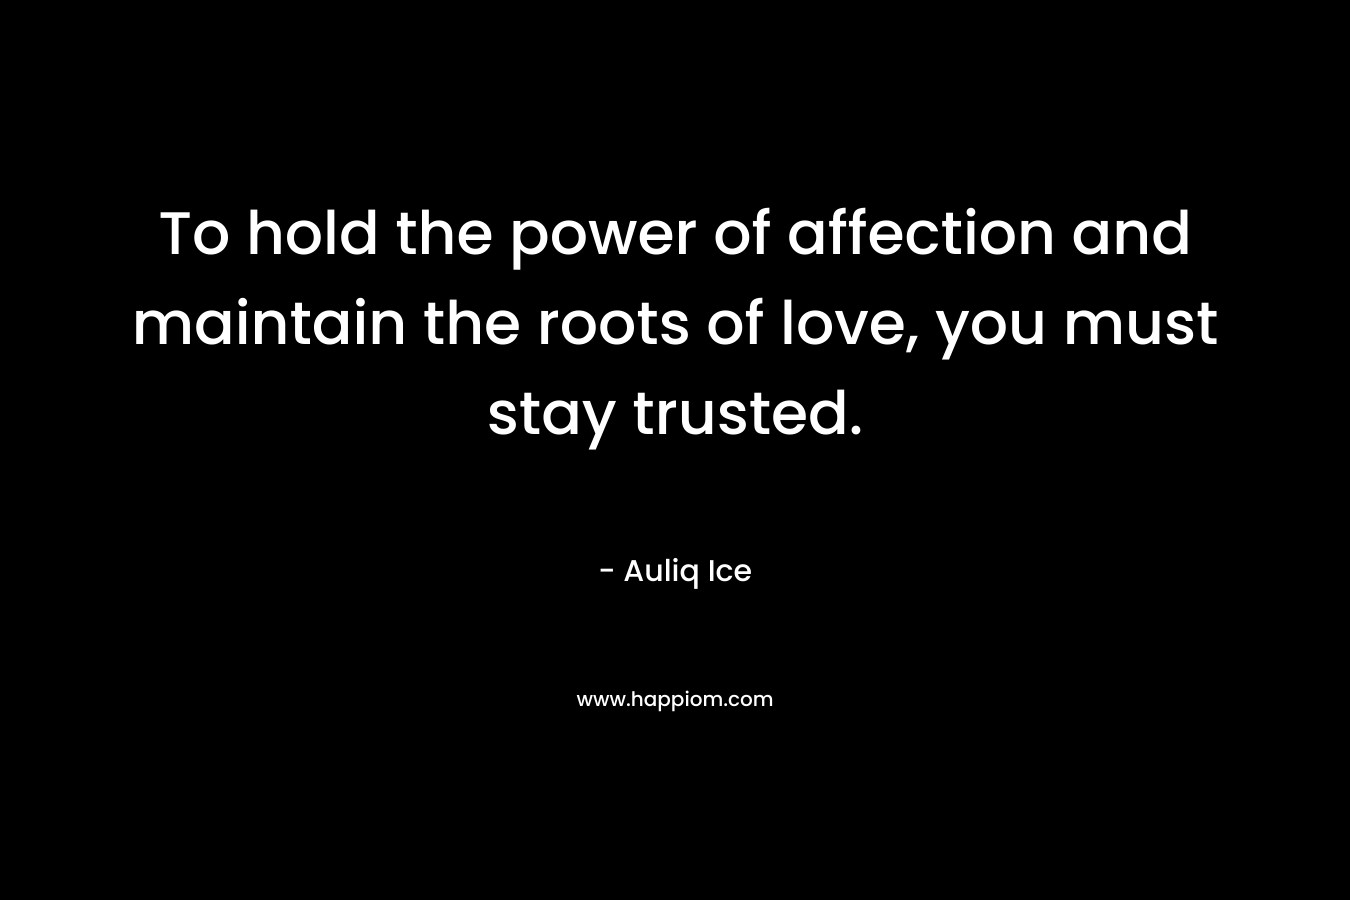 To hold the power of affection and maintain the roots of love, you must stay trusted.